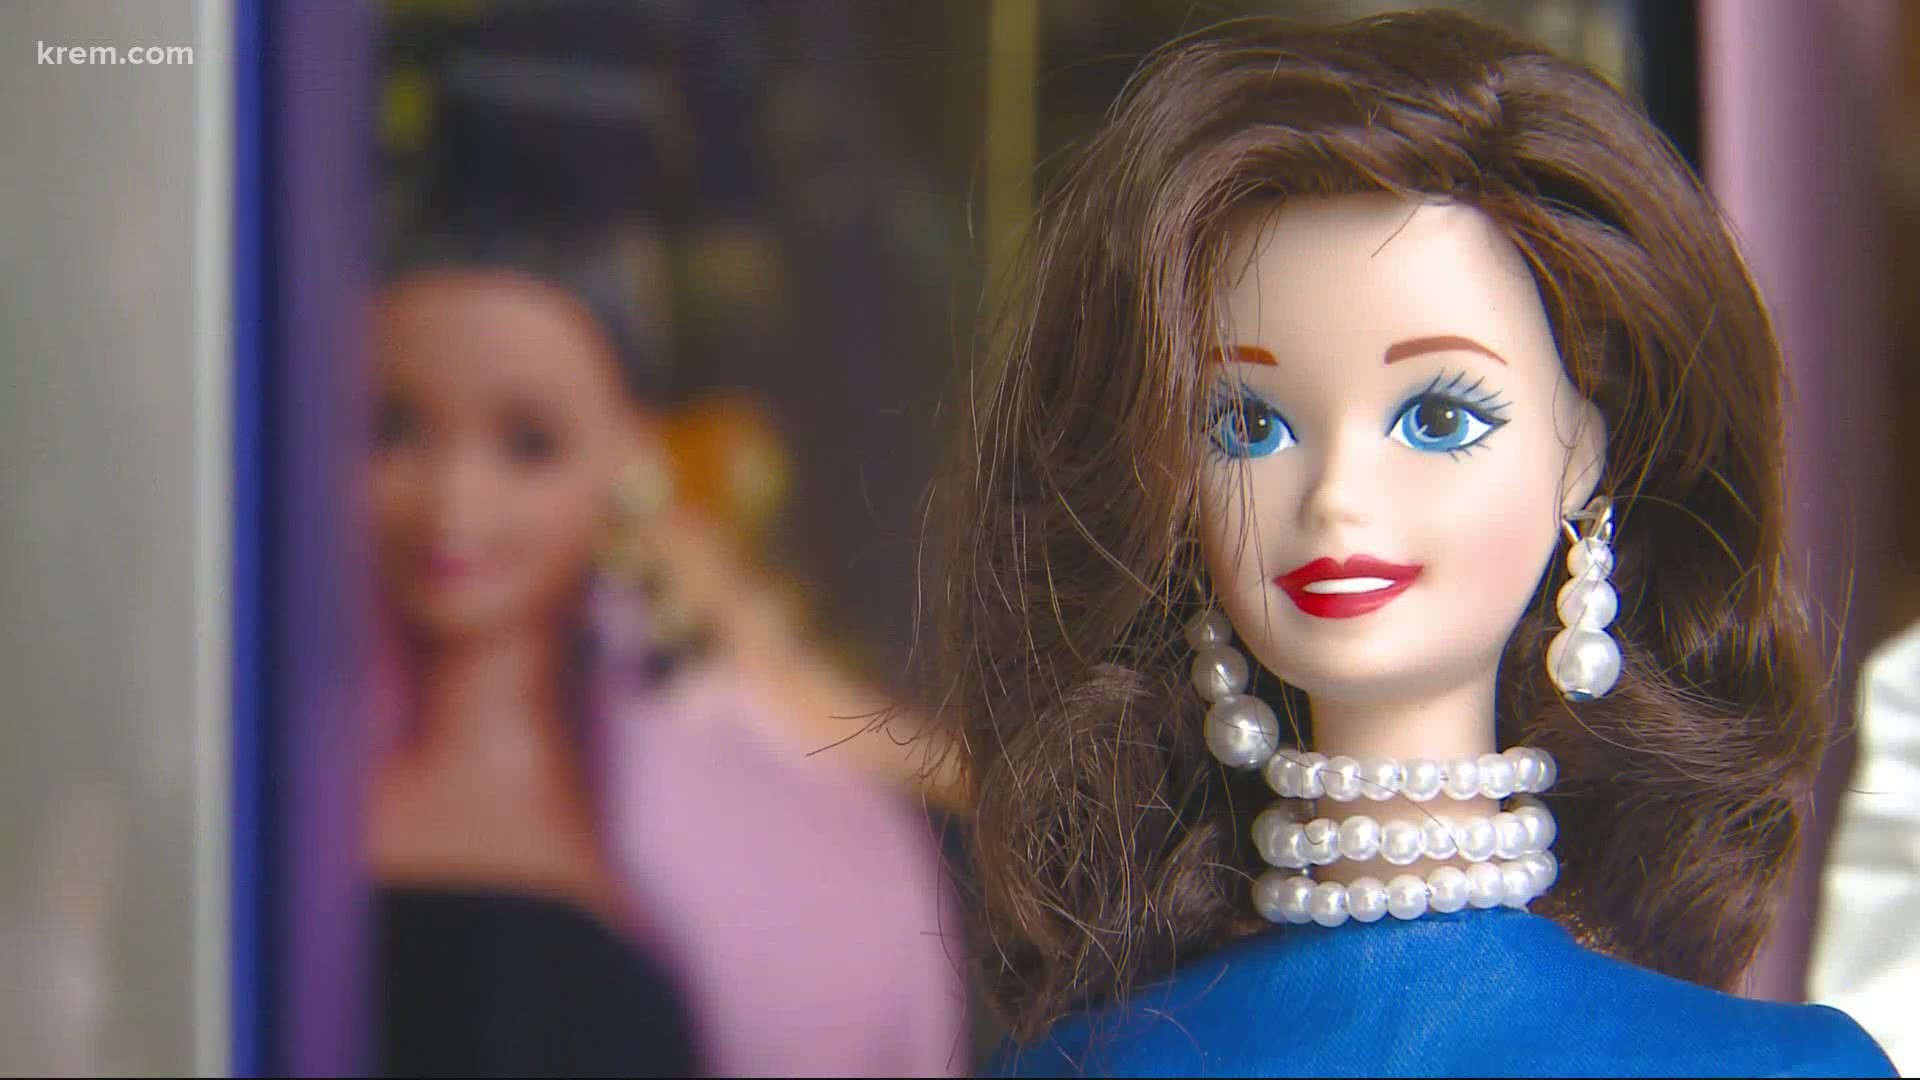 Bjorklund’s mother passed away in March at 90-years-old, leaving behind a Barbie collection of at least 2,000 dolls.